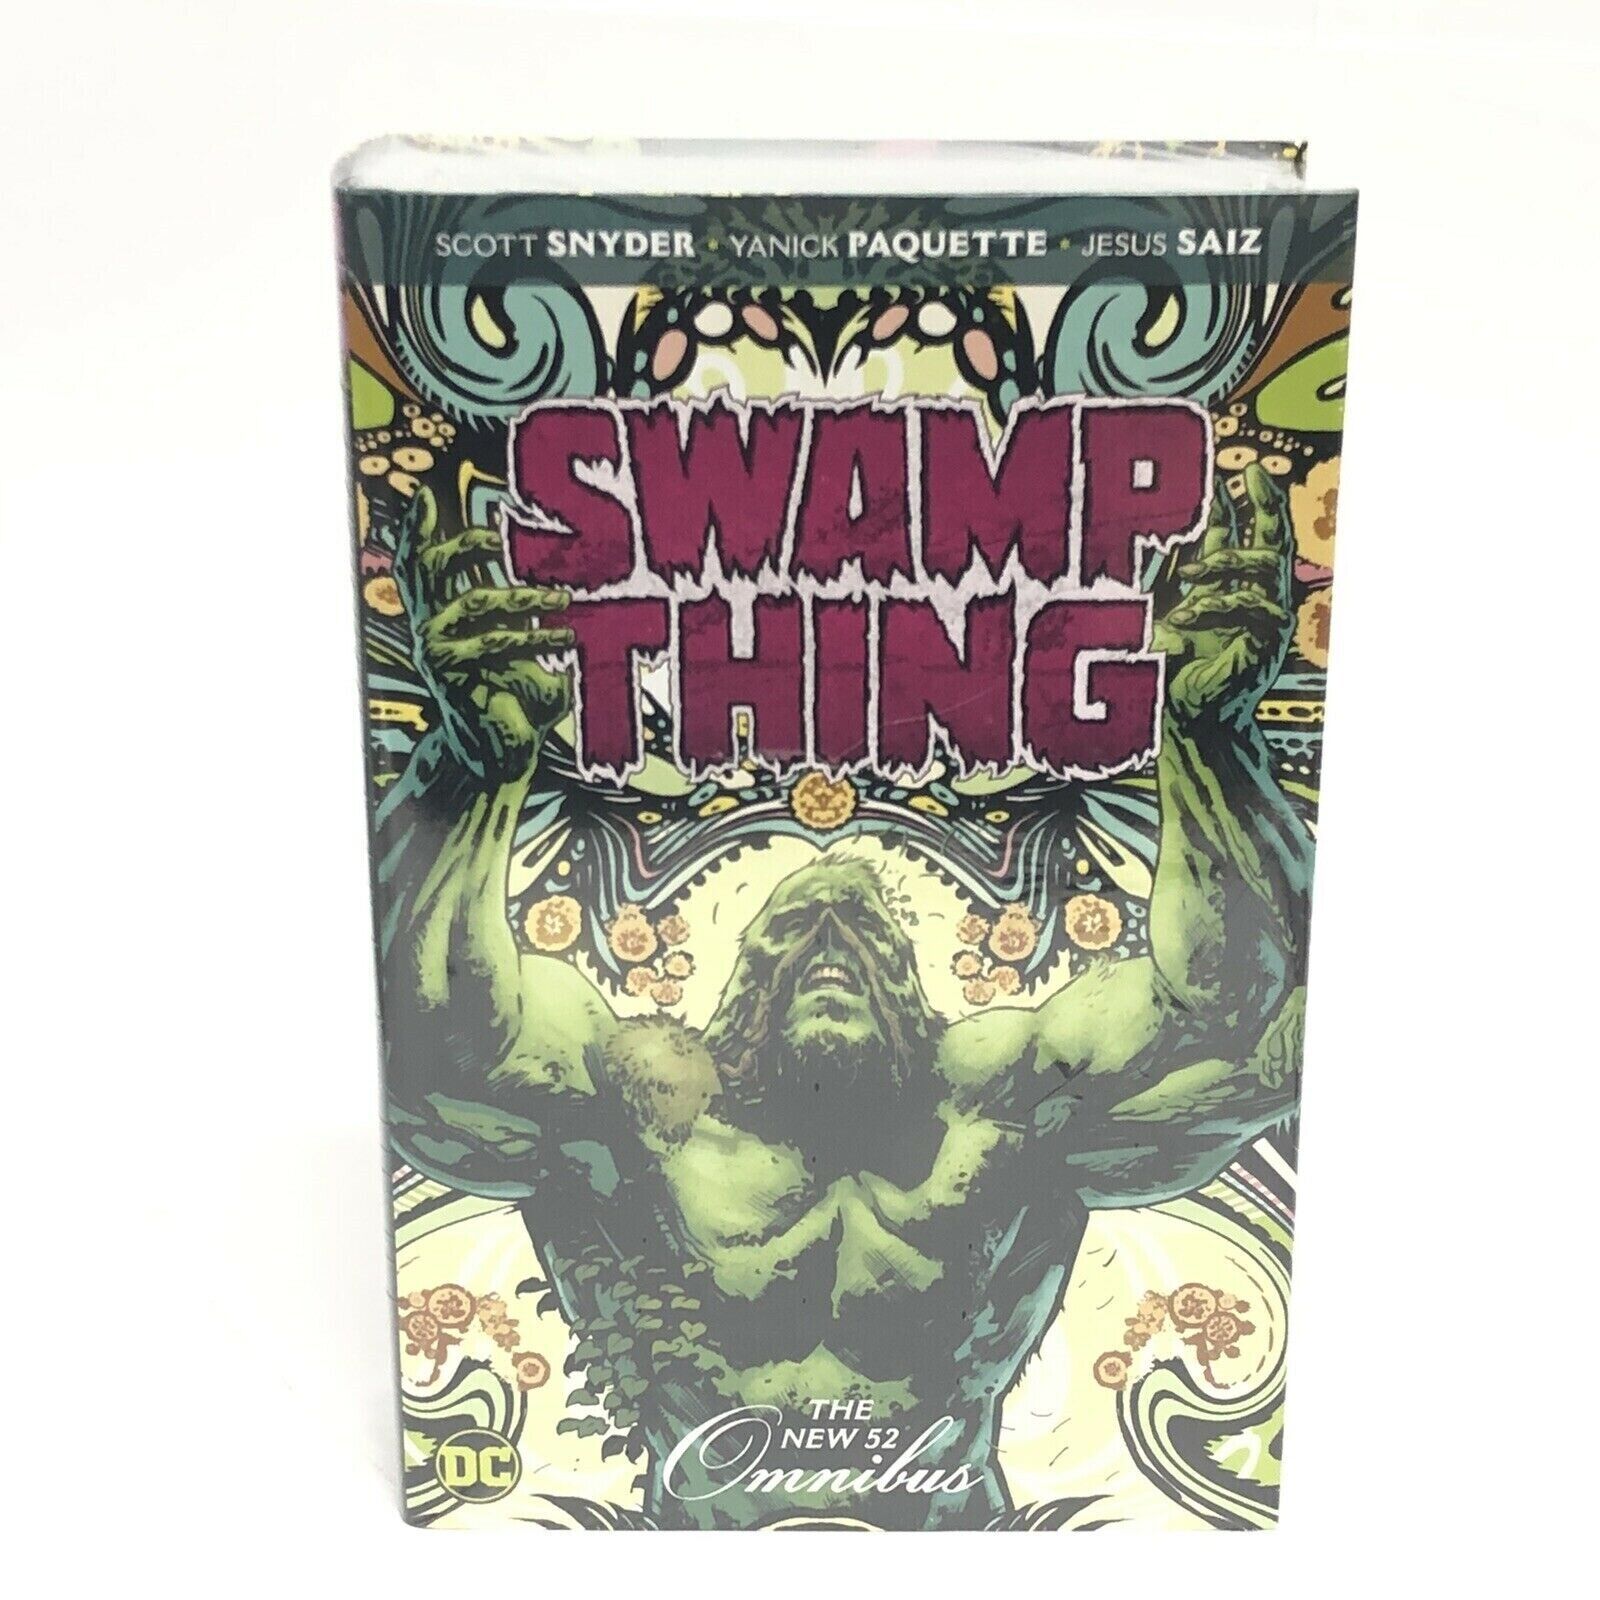 Swamp Thing The New 52 Omnibus New DC Comics HC Hardcover Sealed Scott Snyder